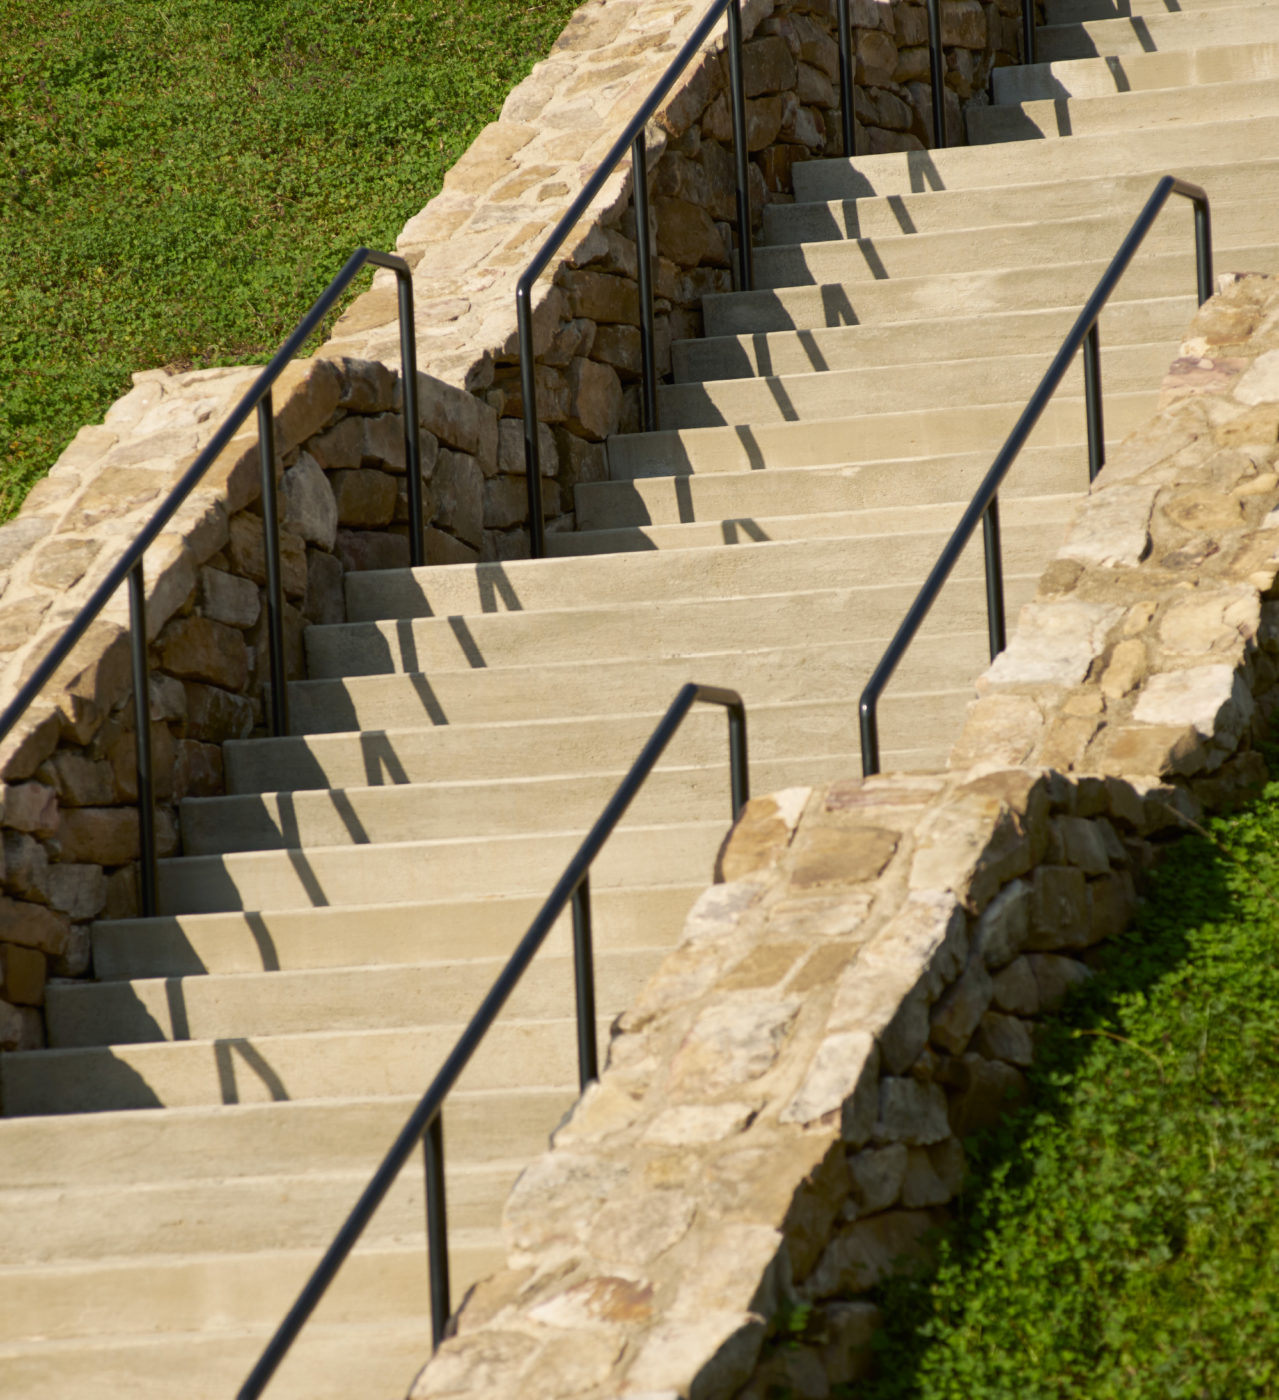 Stone and concrete steps lead up a steep hill at the entrance of the park.